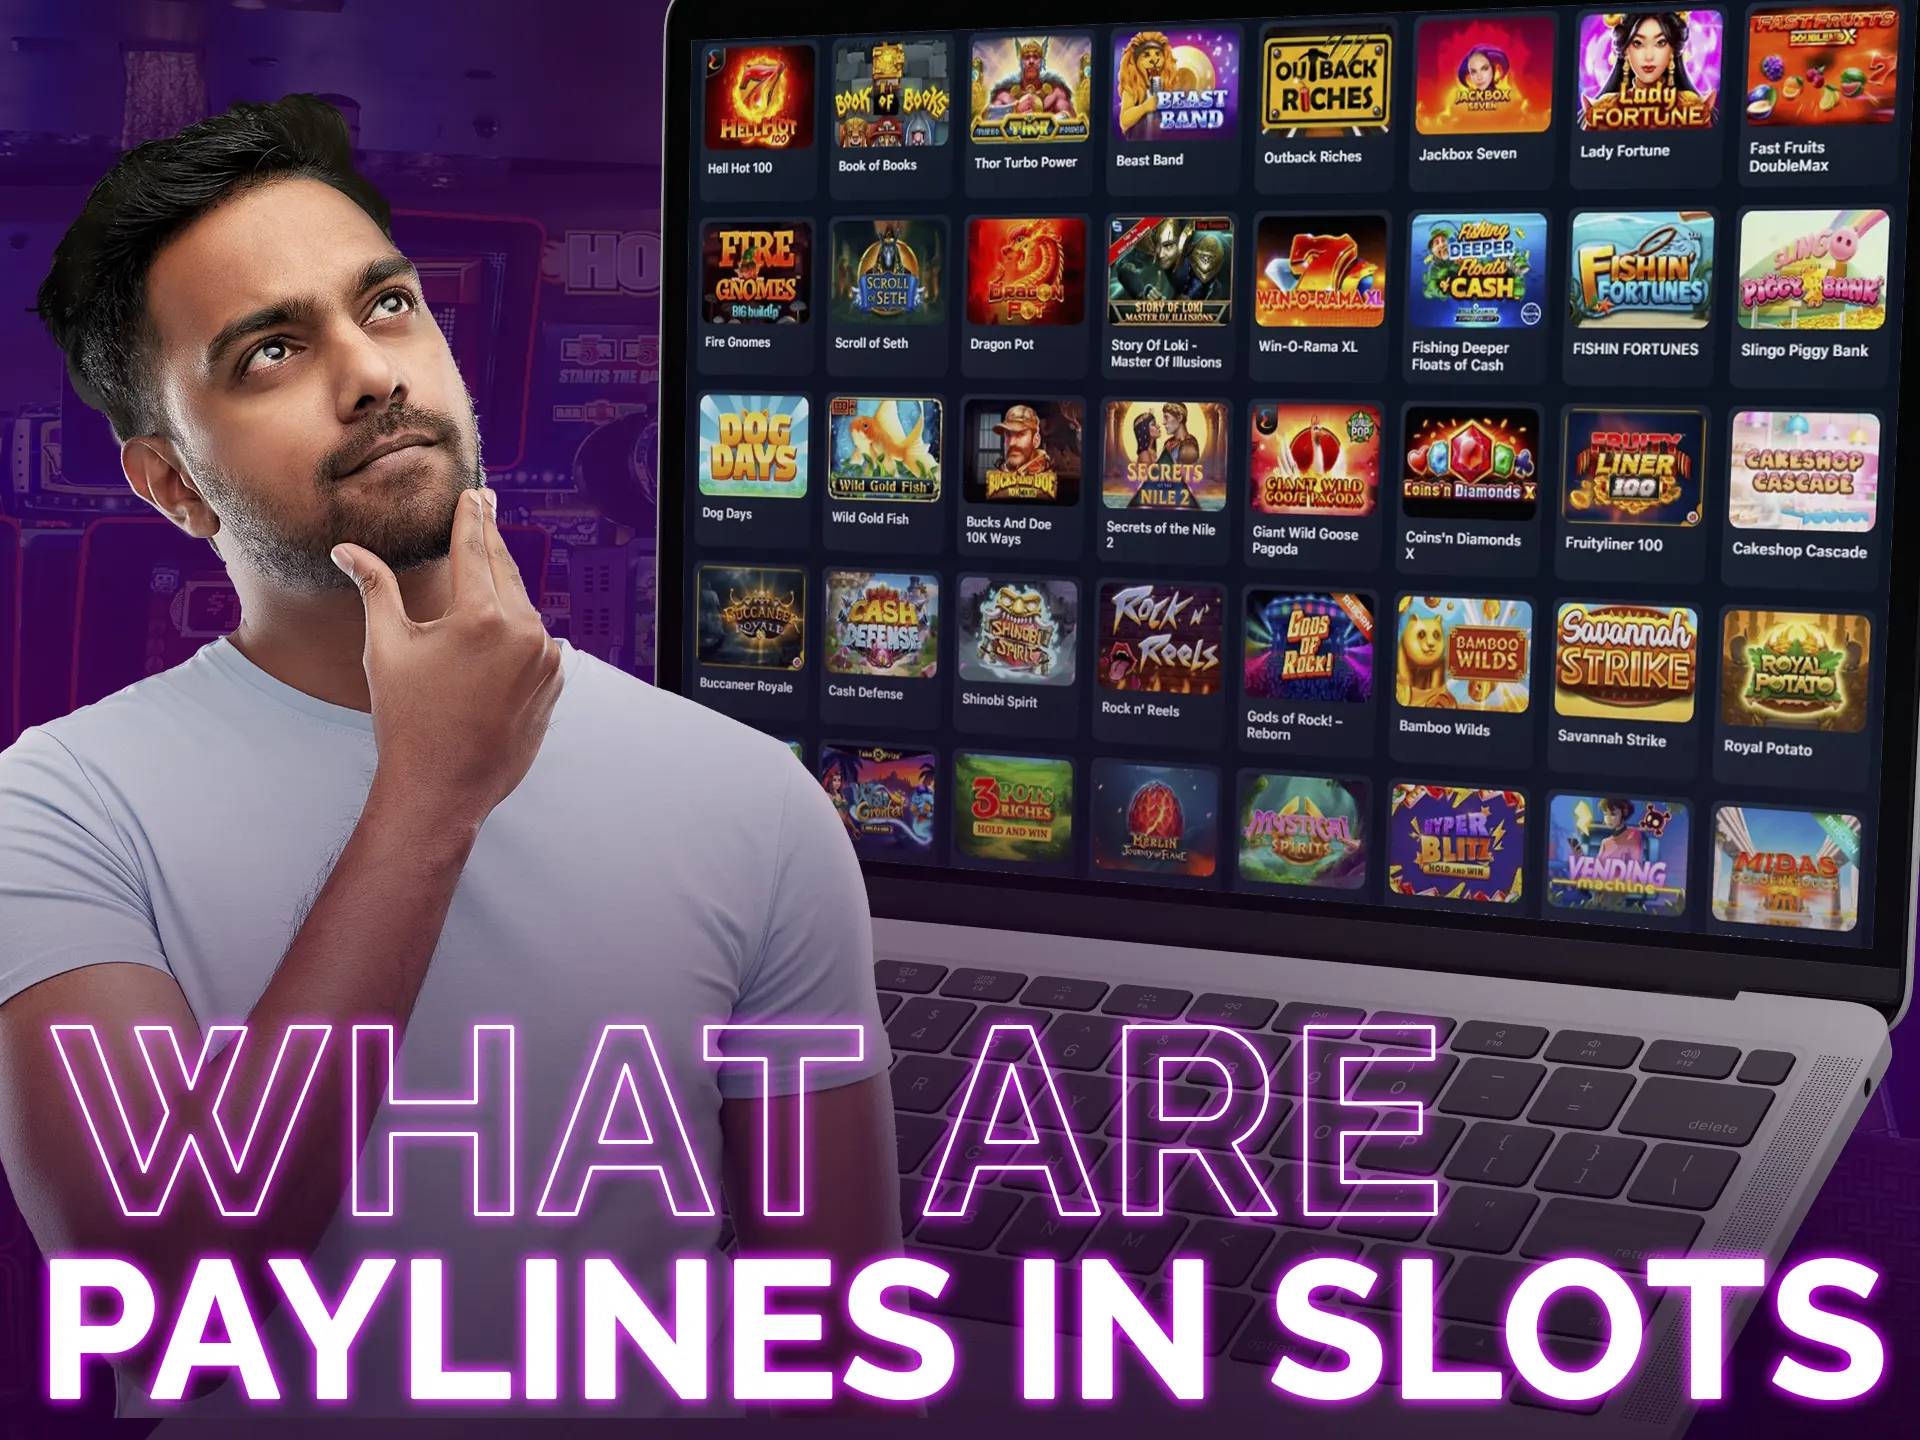 Paylines in slots determine winning combinations.